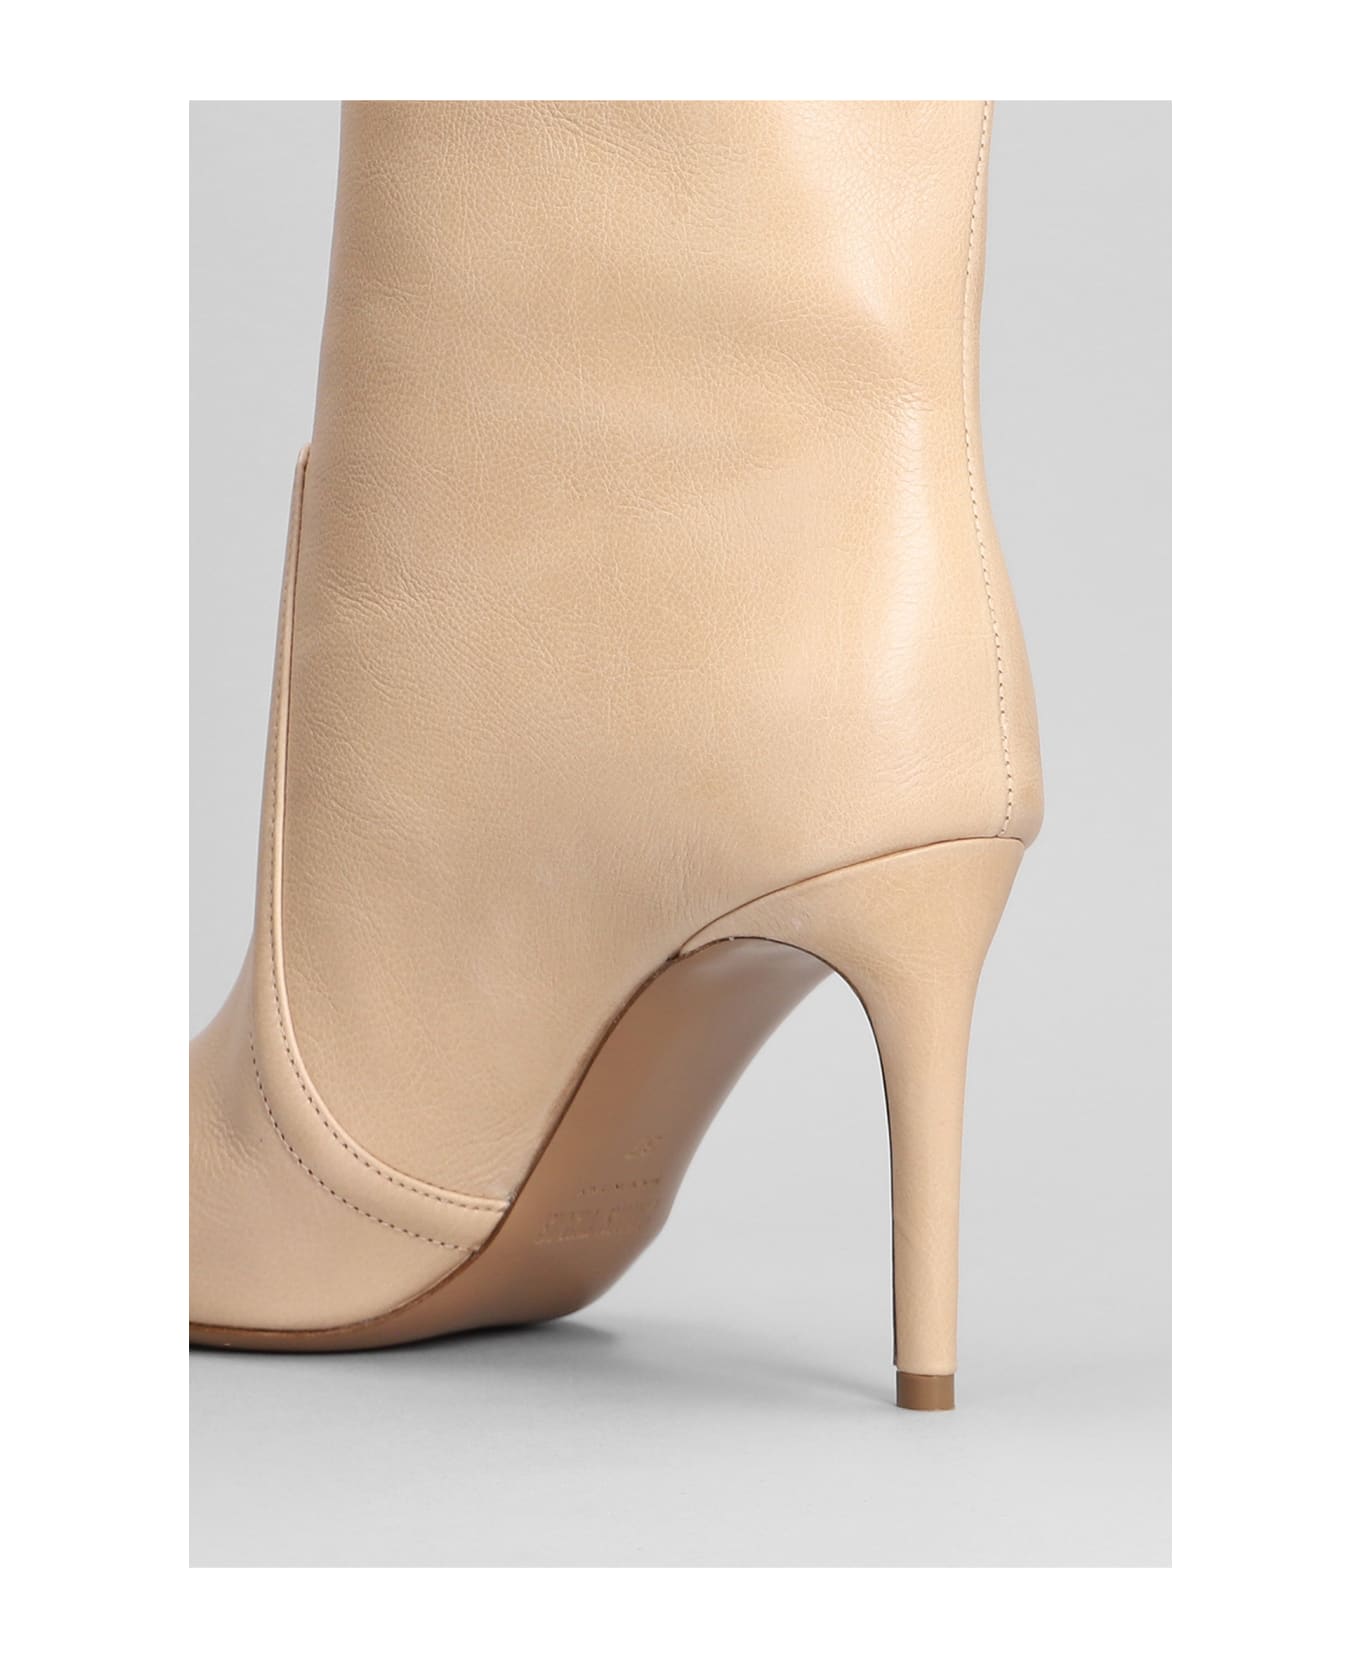 Paris Texas High Heels Ankle Boots In Powder Leather - powder